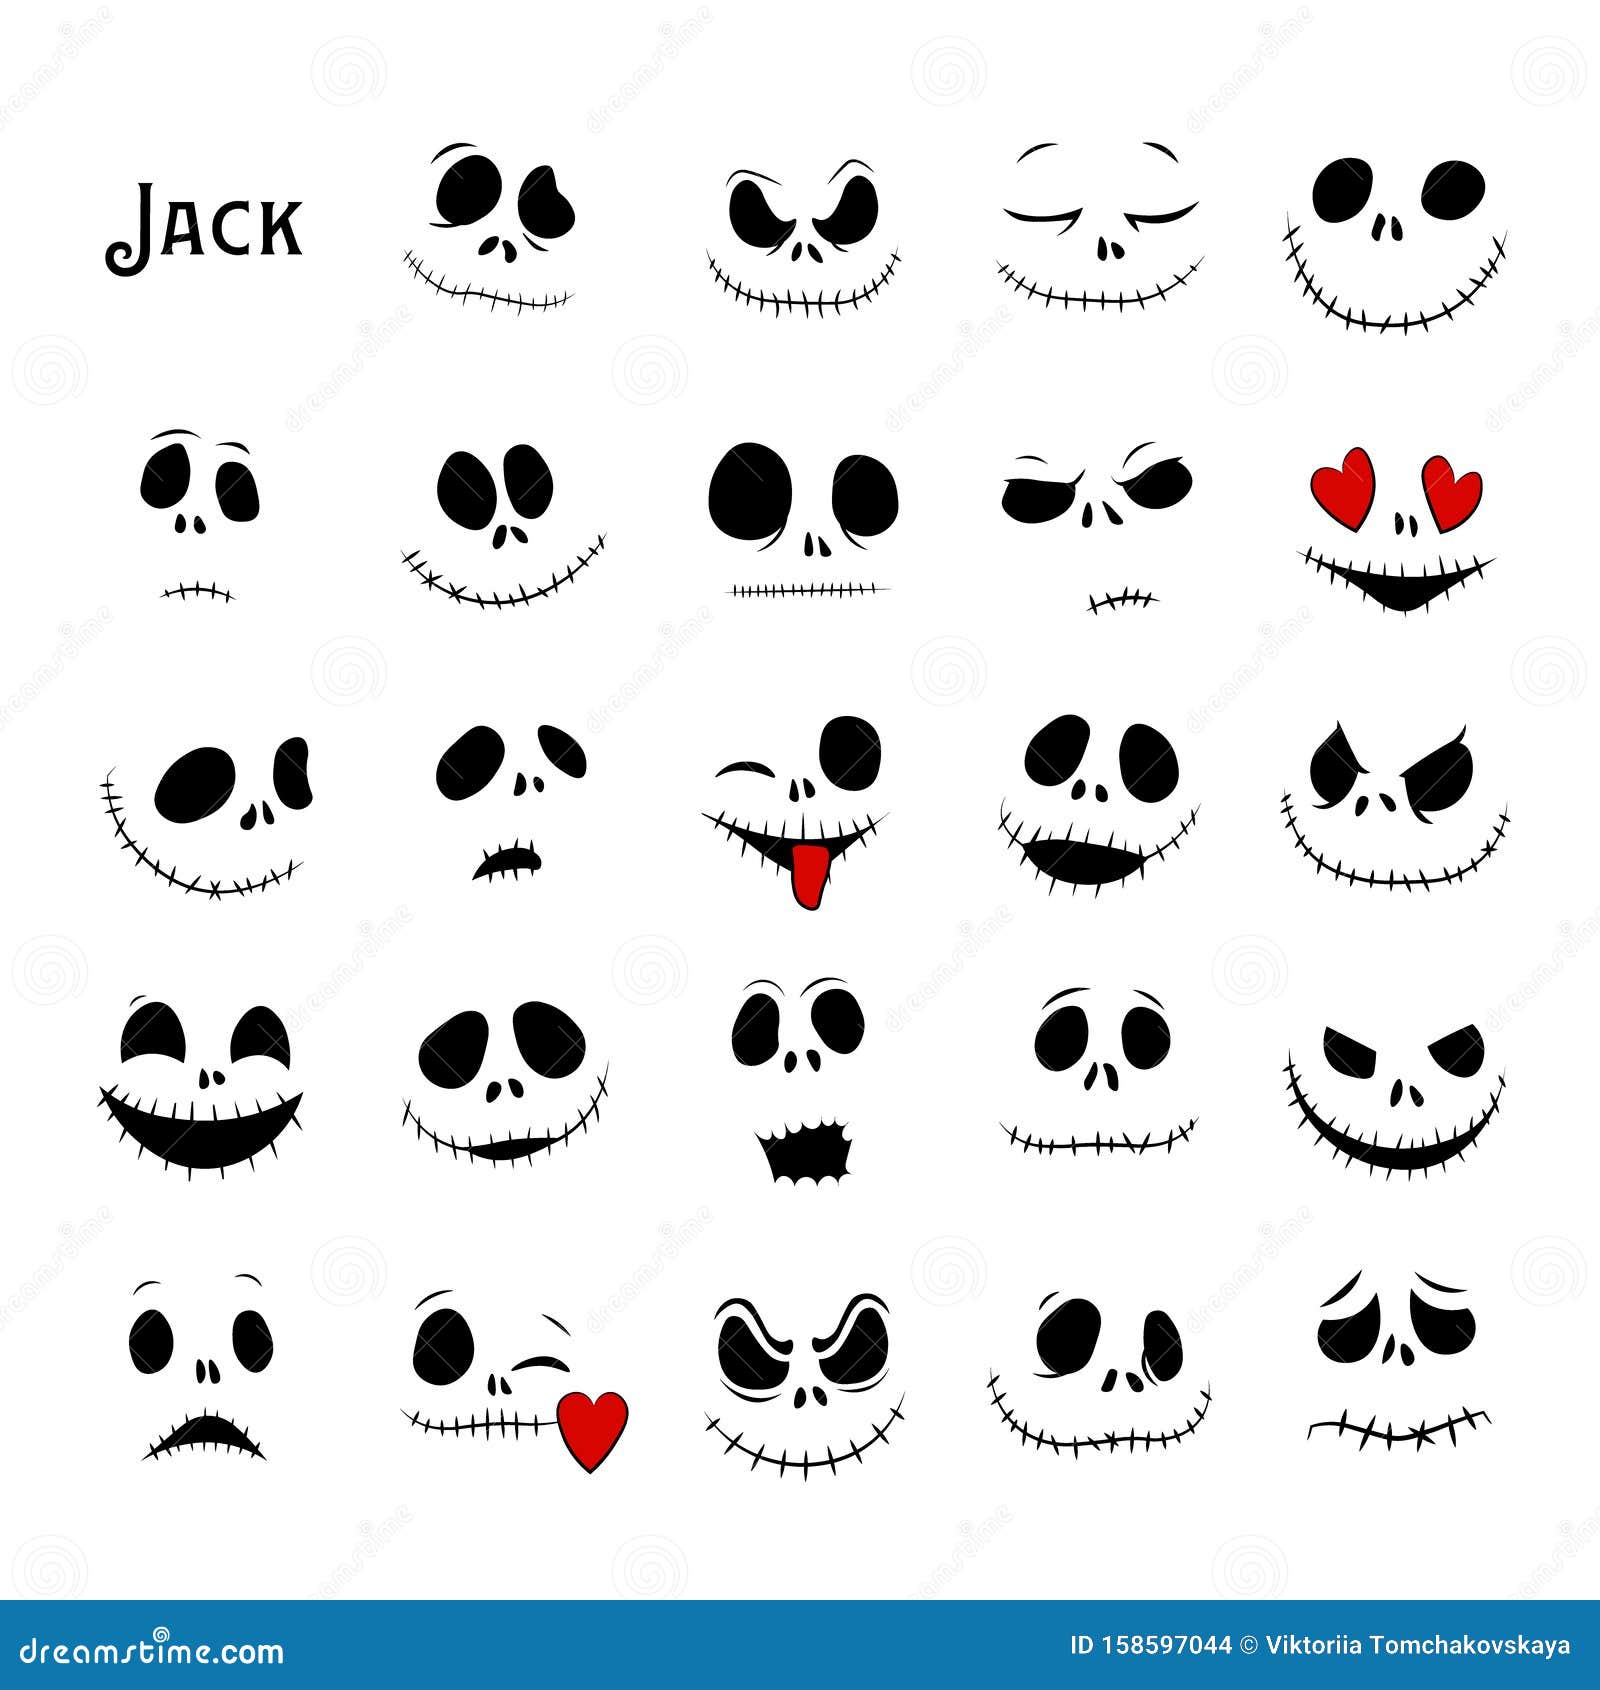  collection of halloween faces. the nightmare before christmas. jack skellington. halloween jack faces silhouettes